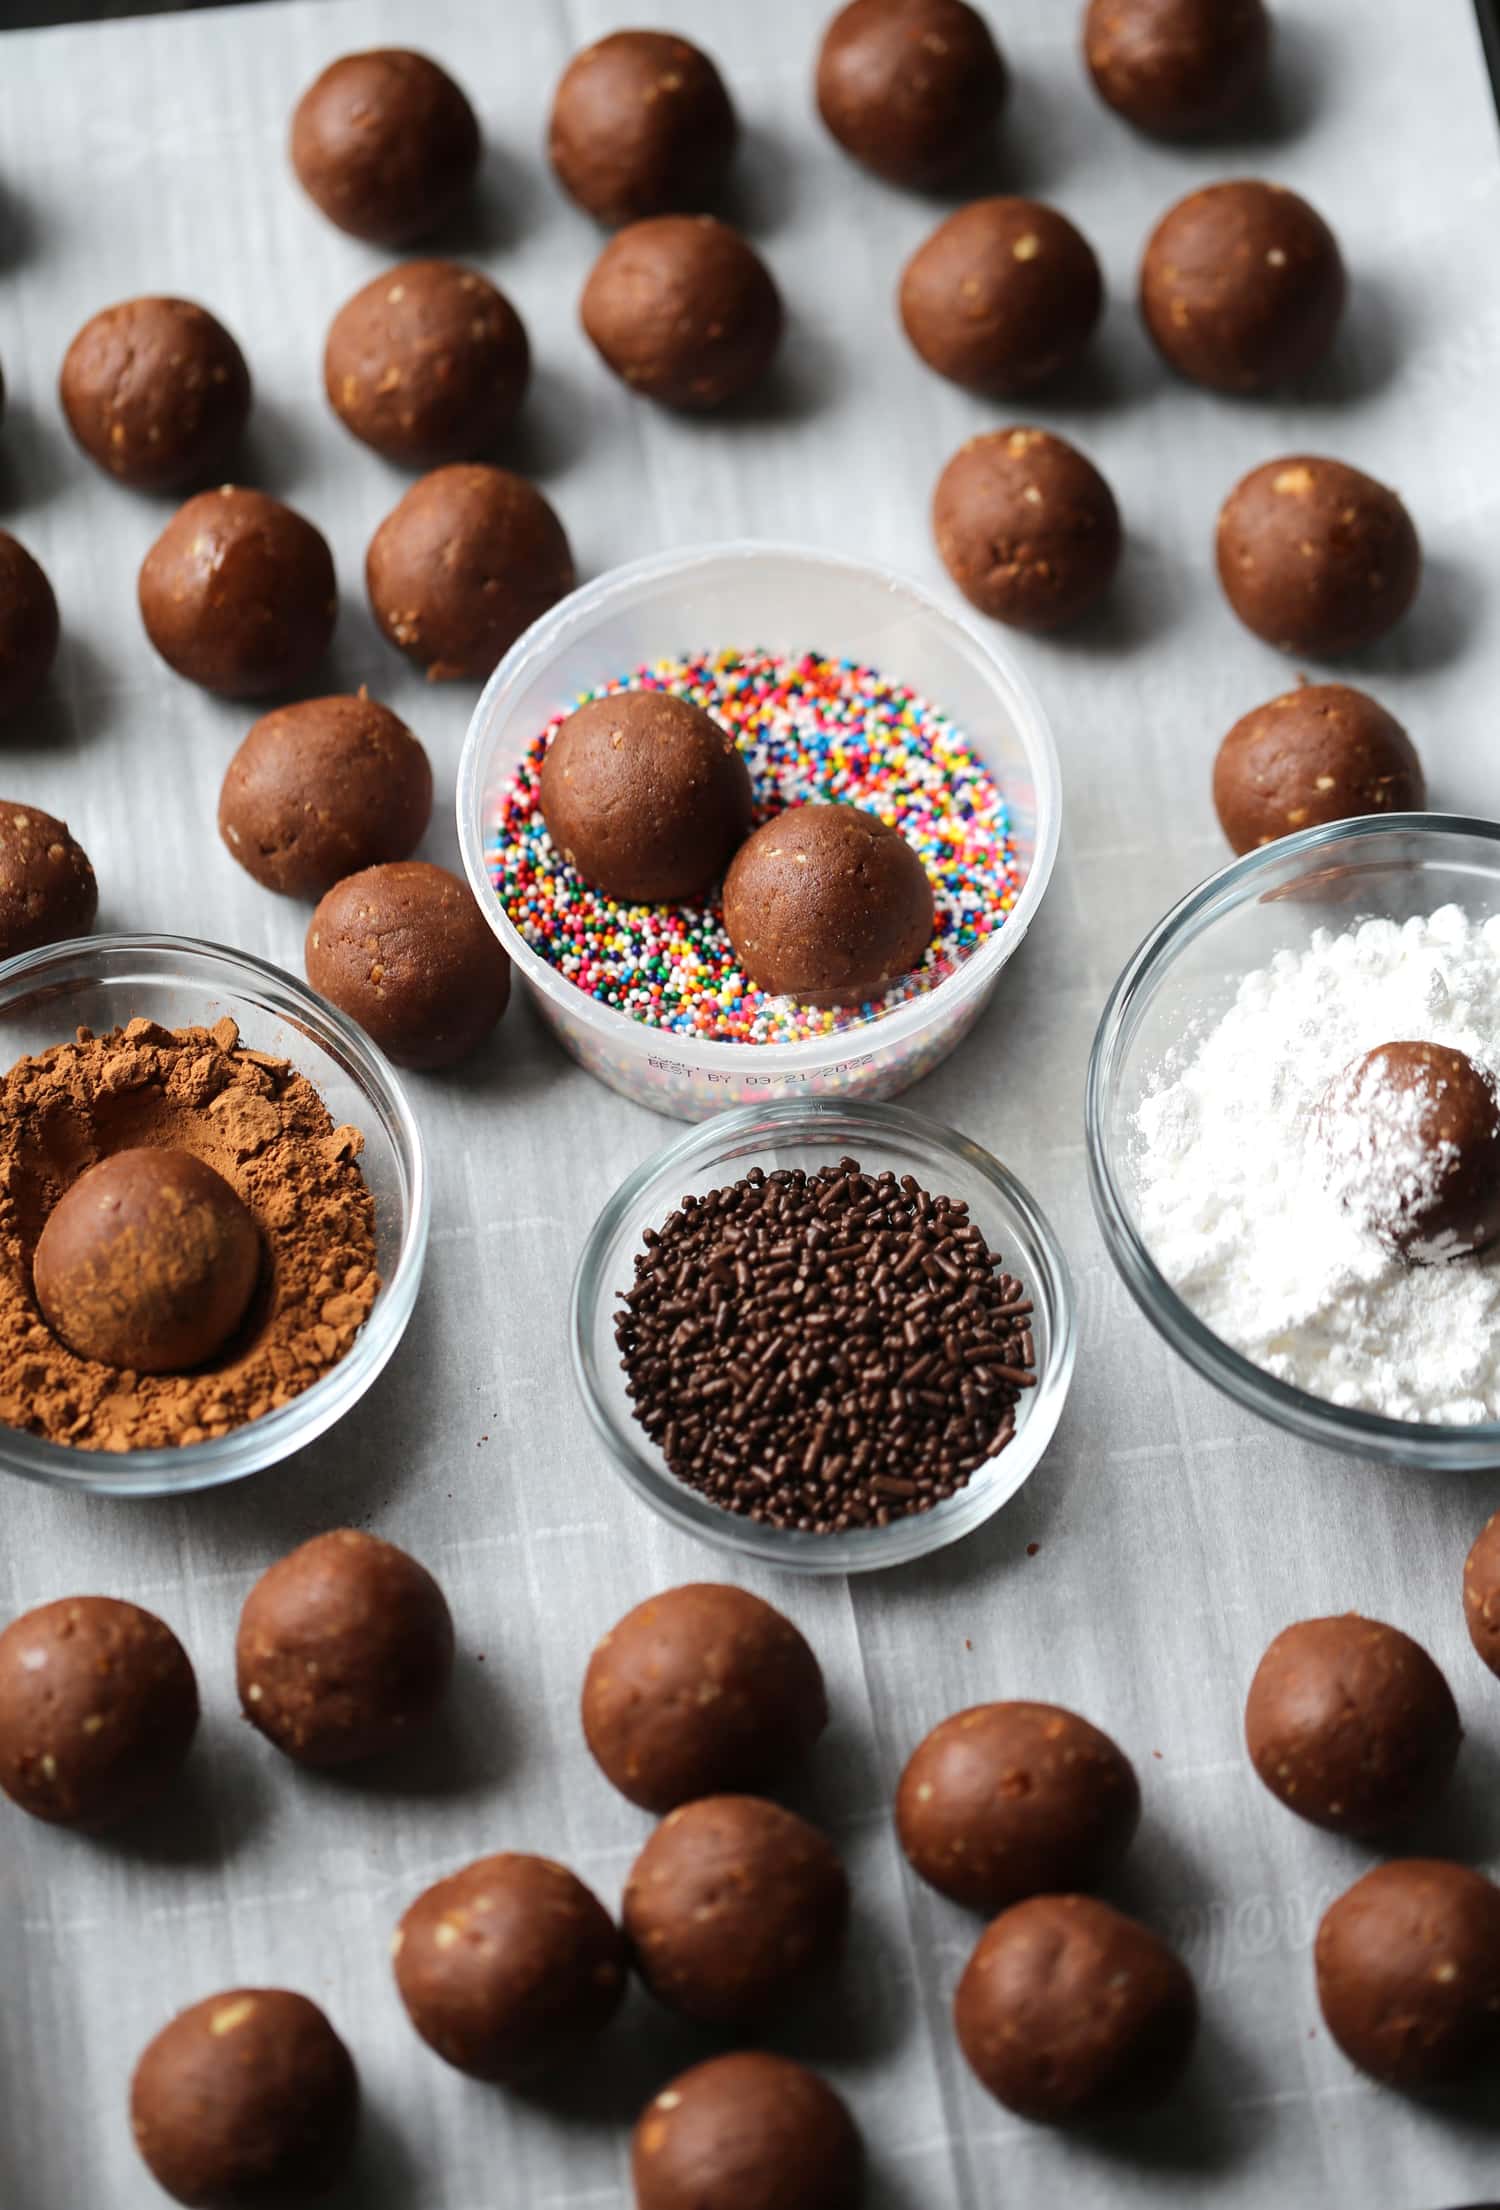 An assortment of holiday rum balls being rolled in bowls of cocoa powder, sprinkles, and powdered sugar.